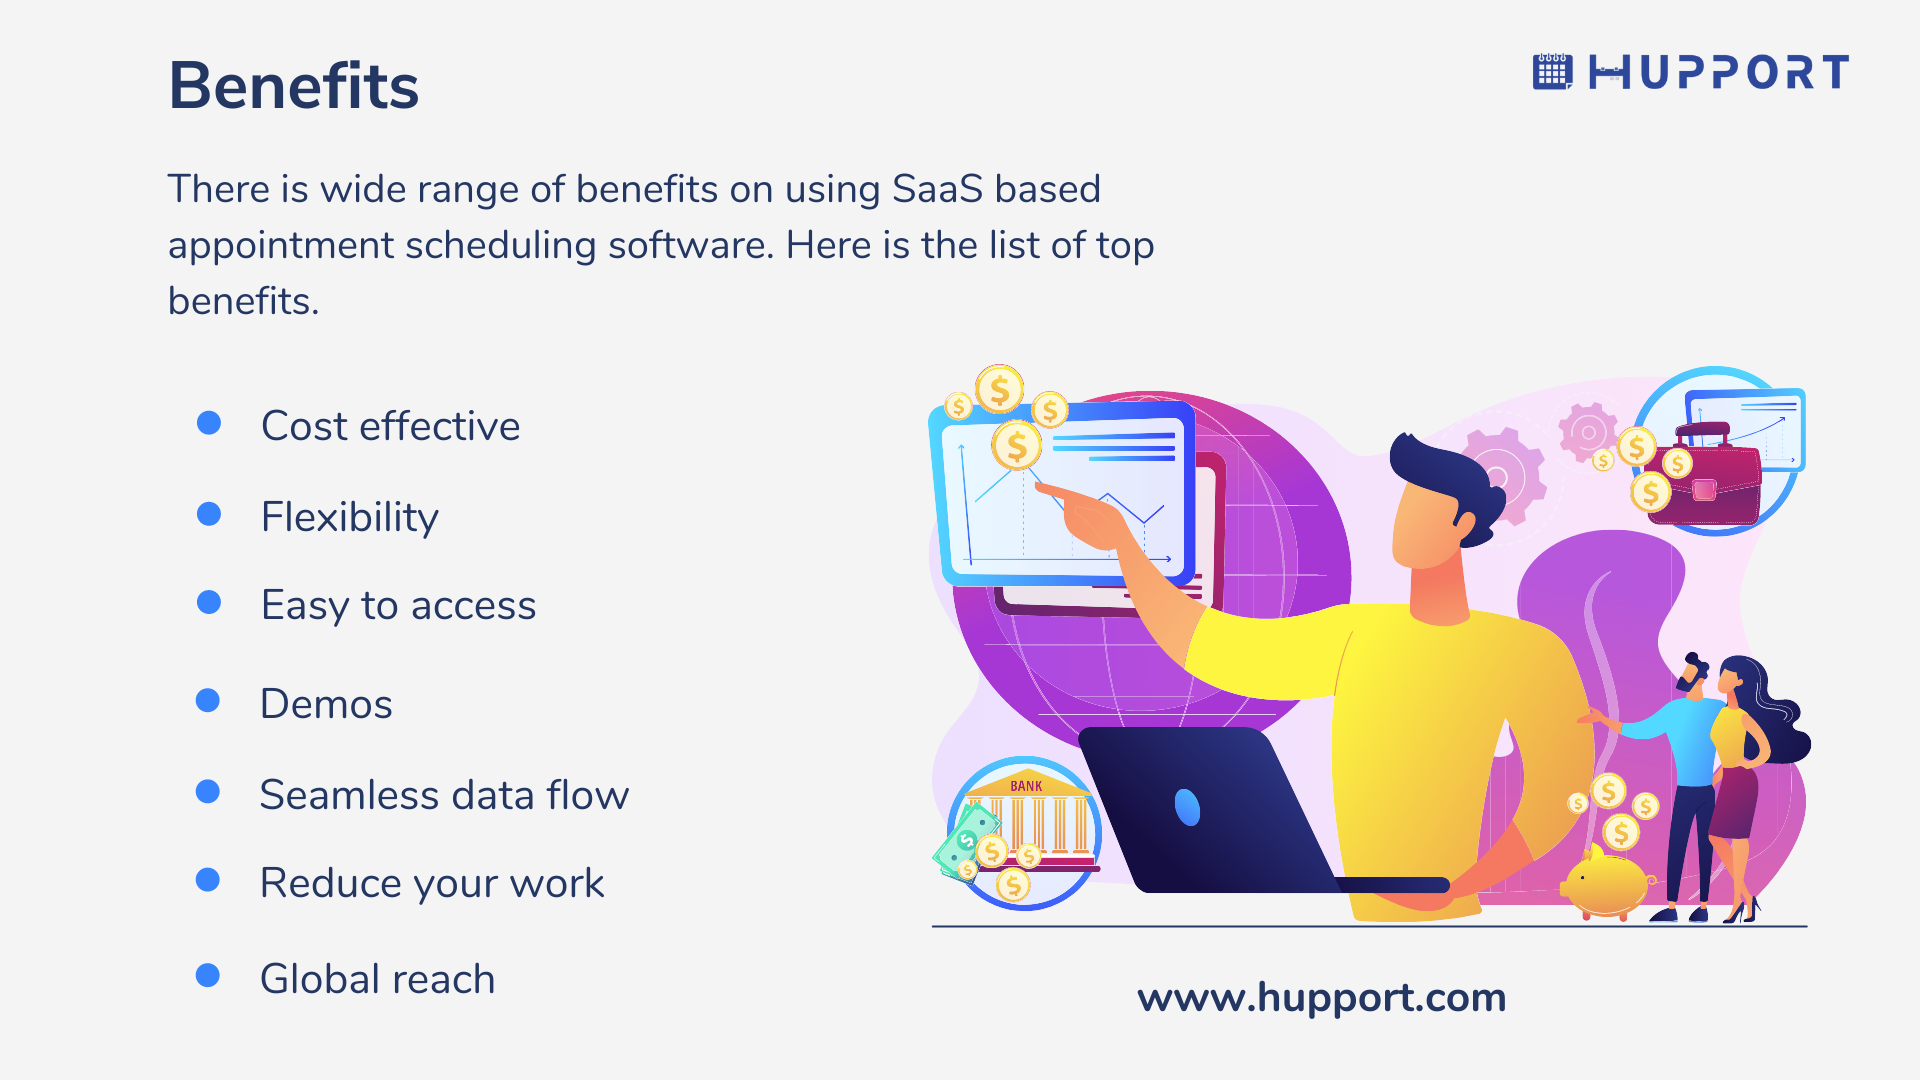 Benefits of SaaS enterprise appointment scheduling software